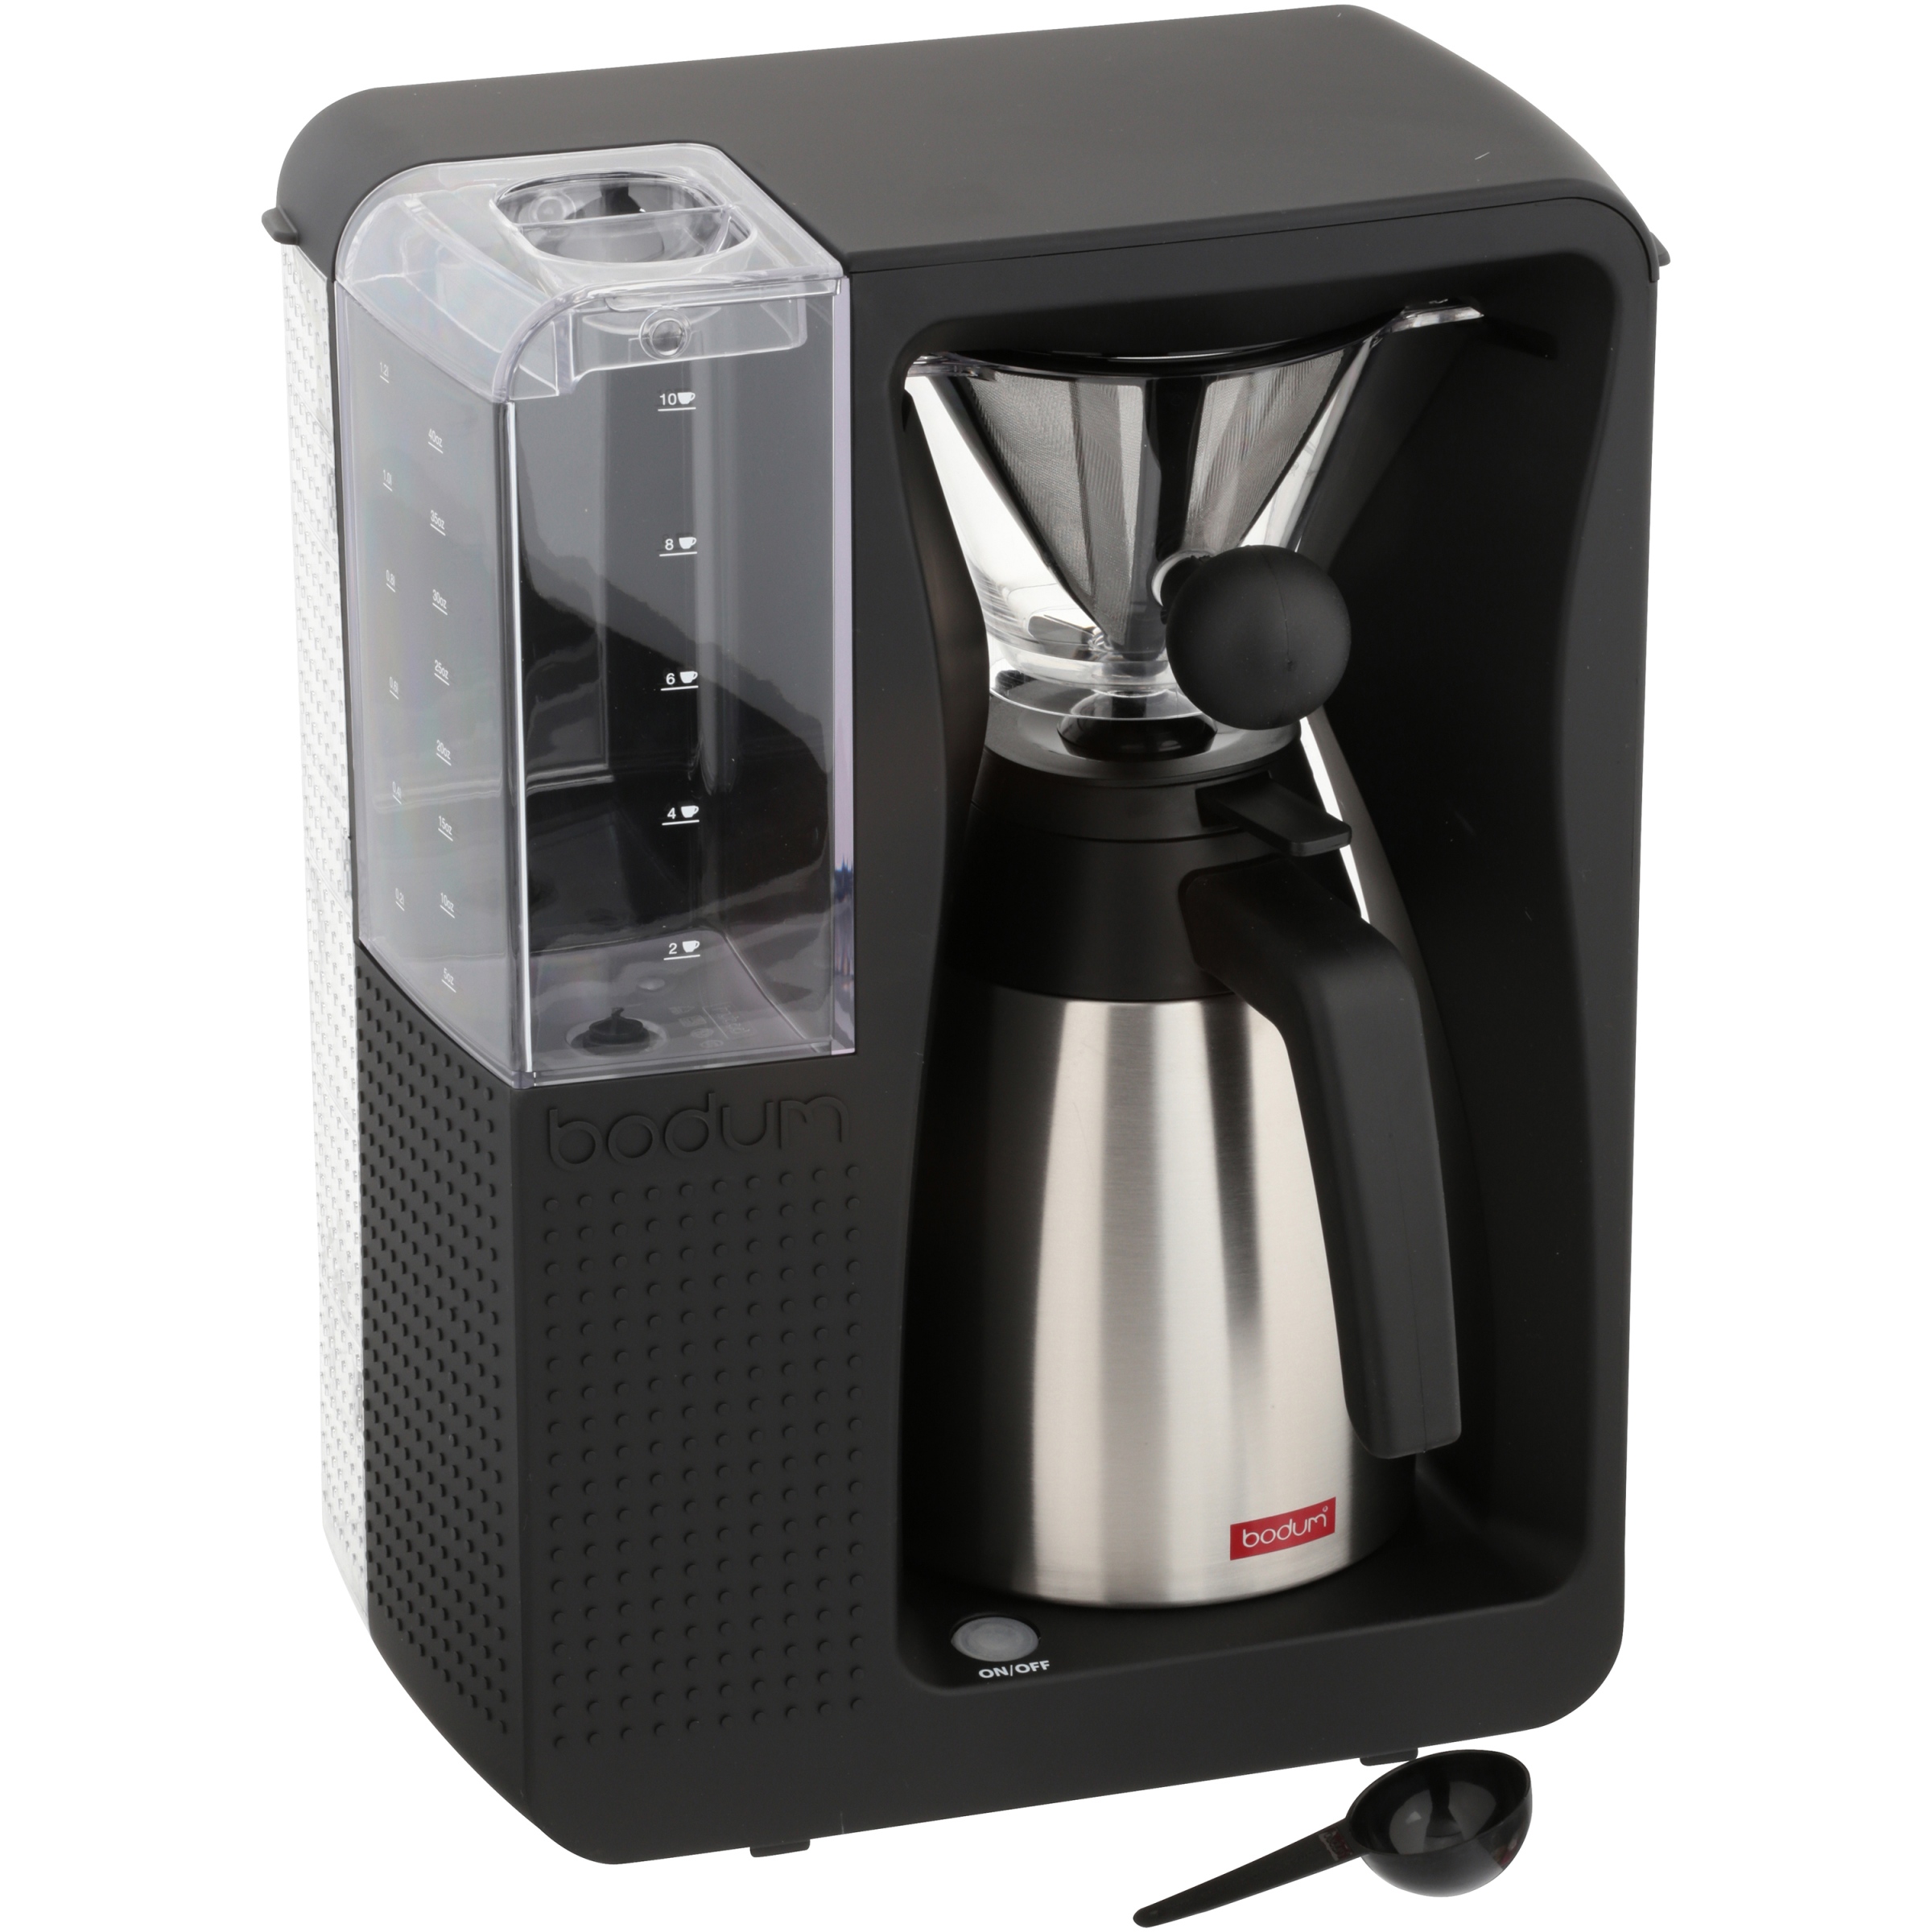 Bodum BISTRO Automatic Pour Over Coffee Machine, Black, 40 Ounce - image 1 of 7